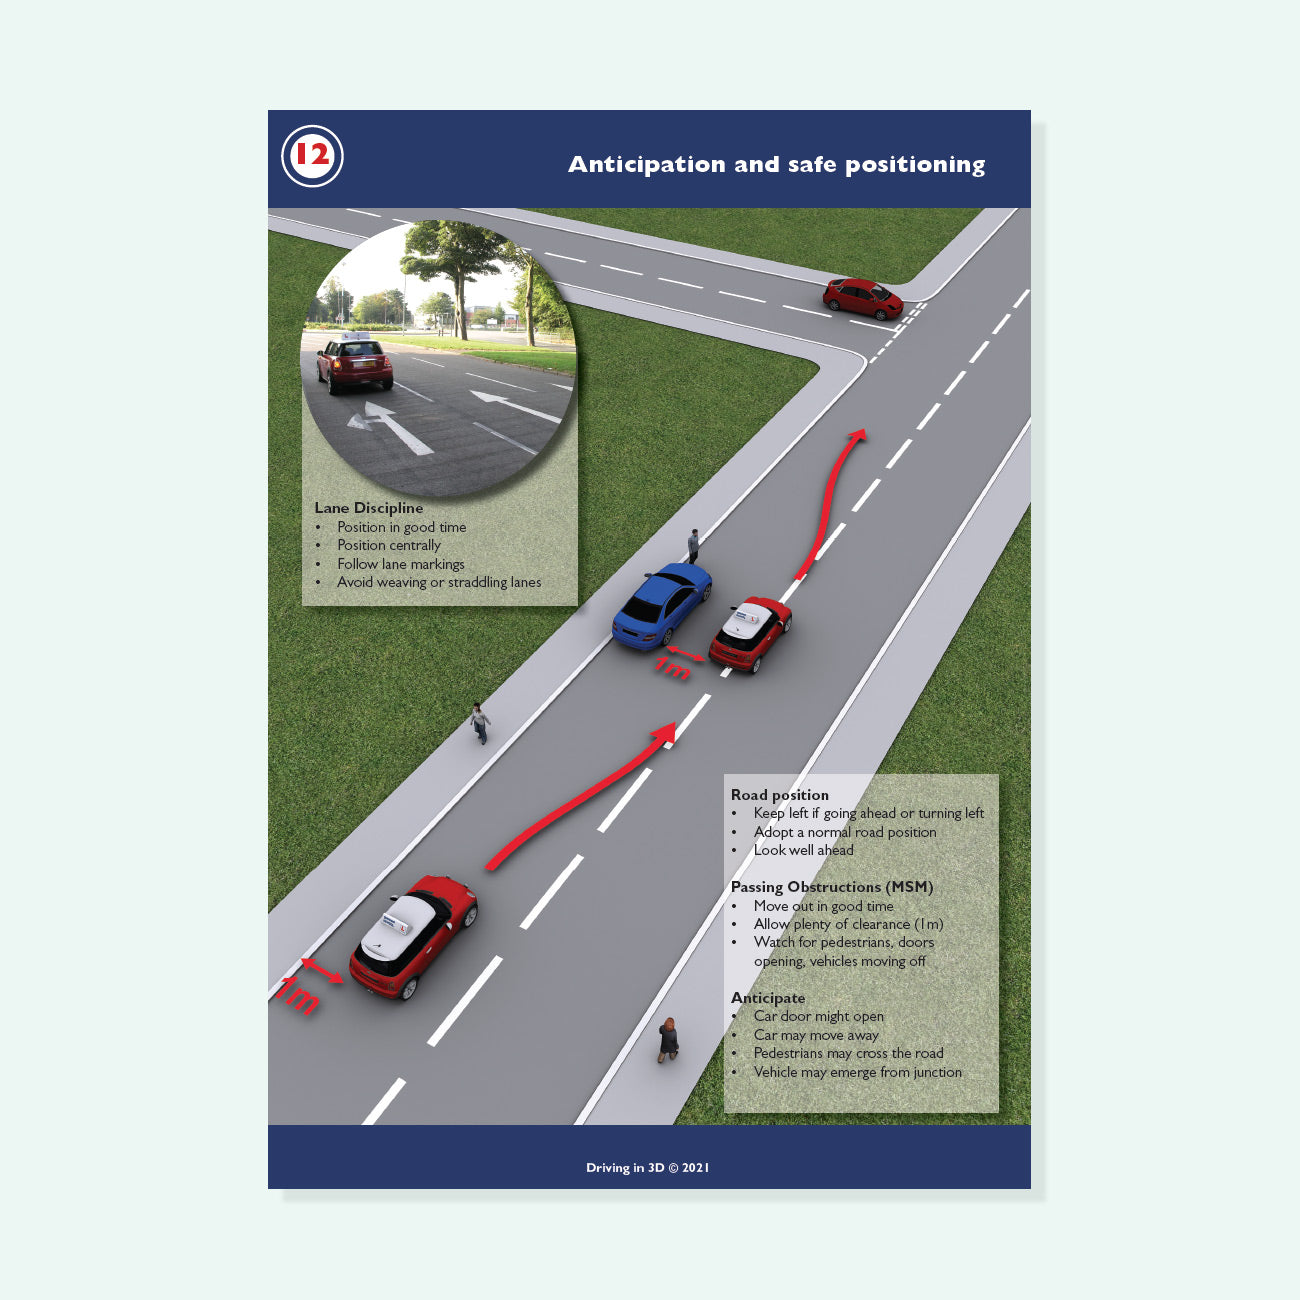 Teach Driving in 3D anticipation and safe positioning